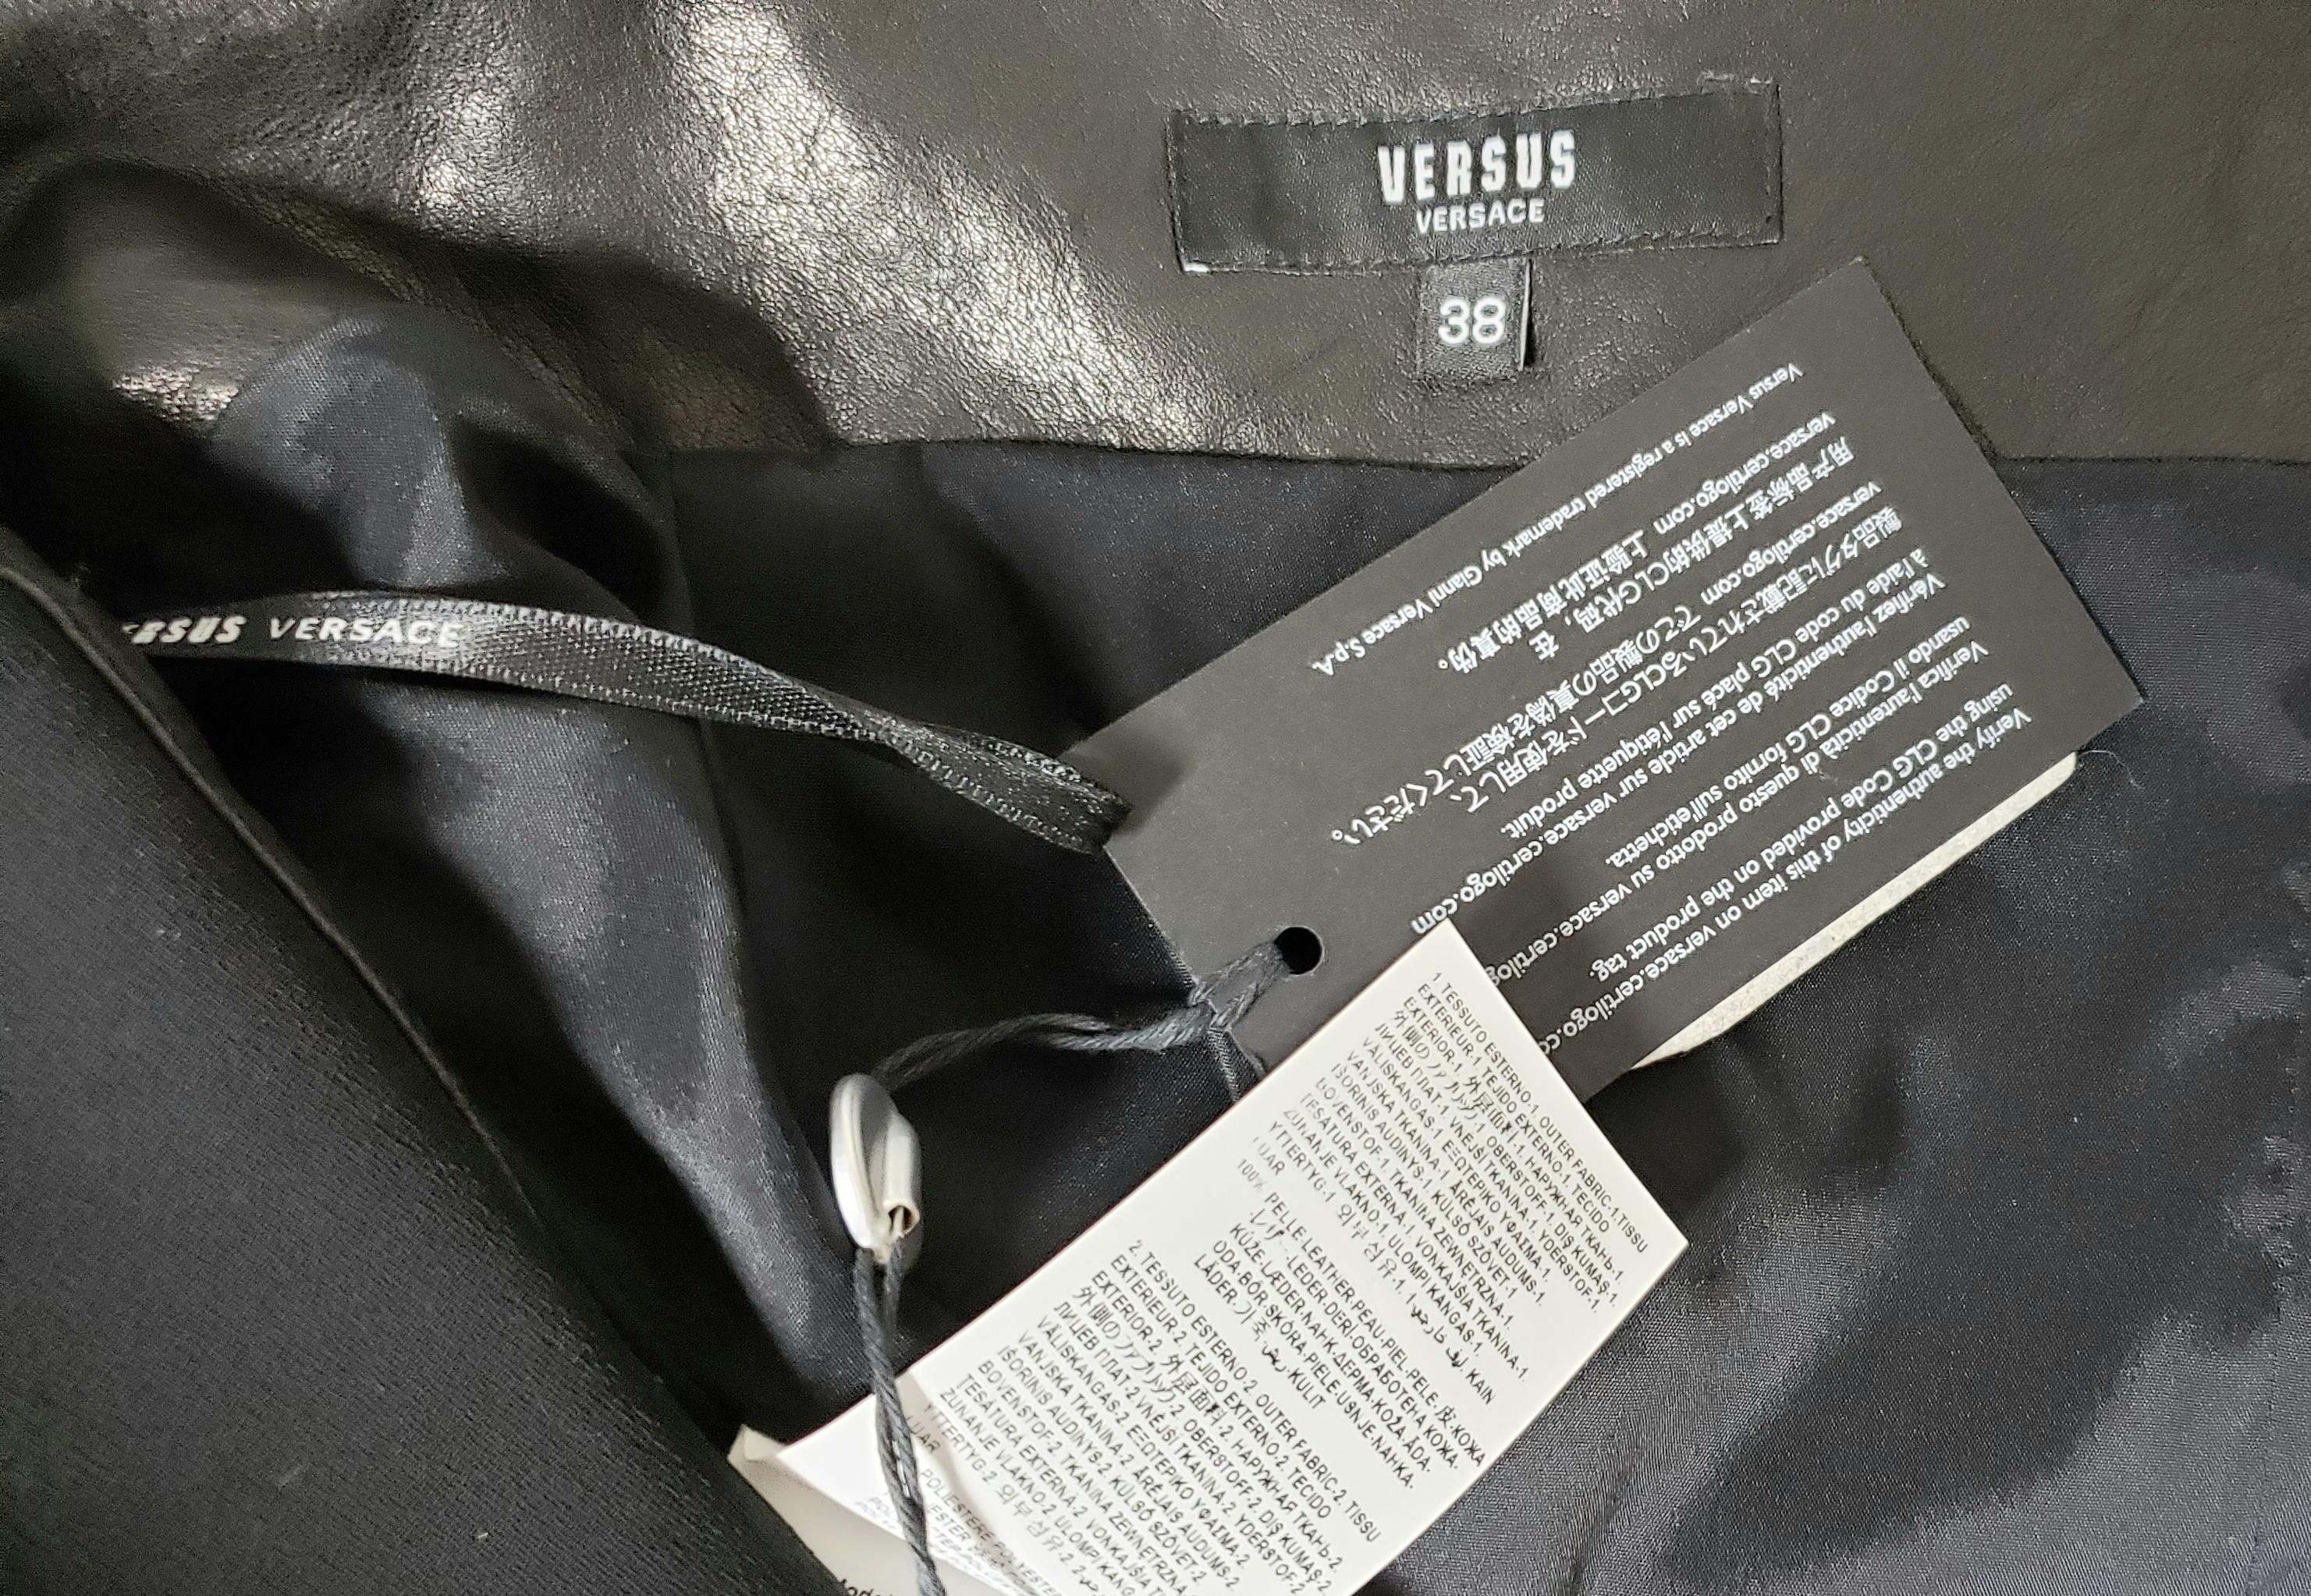 NEW VERSUS VERSACE + ANTHONY VACCARELLO EMBELLISHED LEATHER Dress 38 - 2 For Sale 6